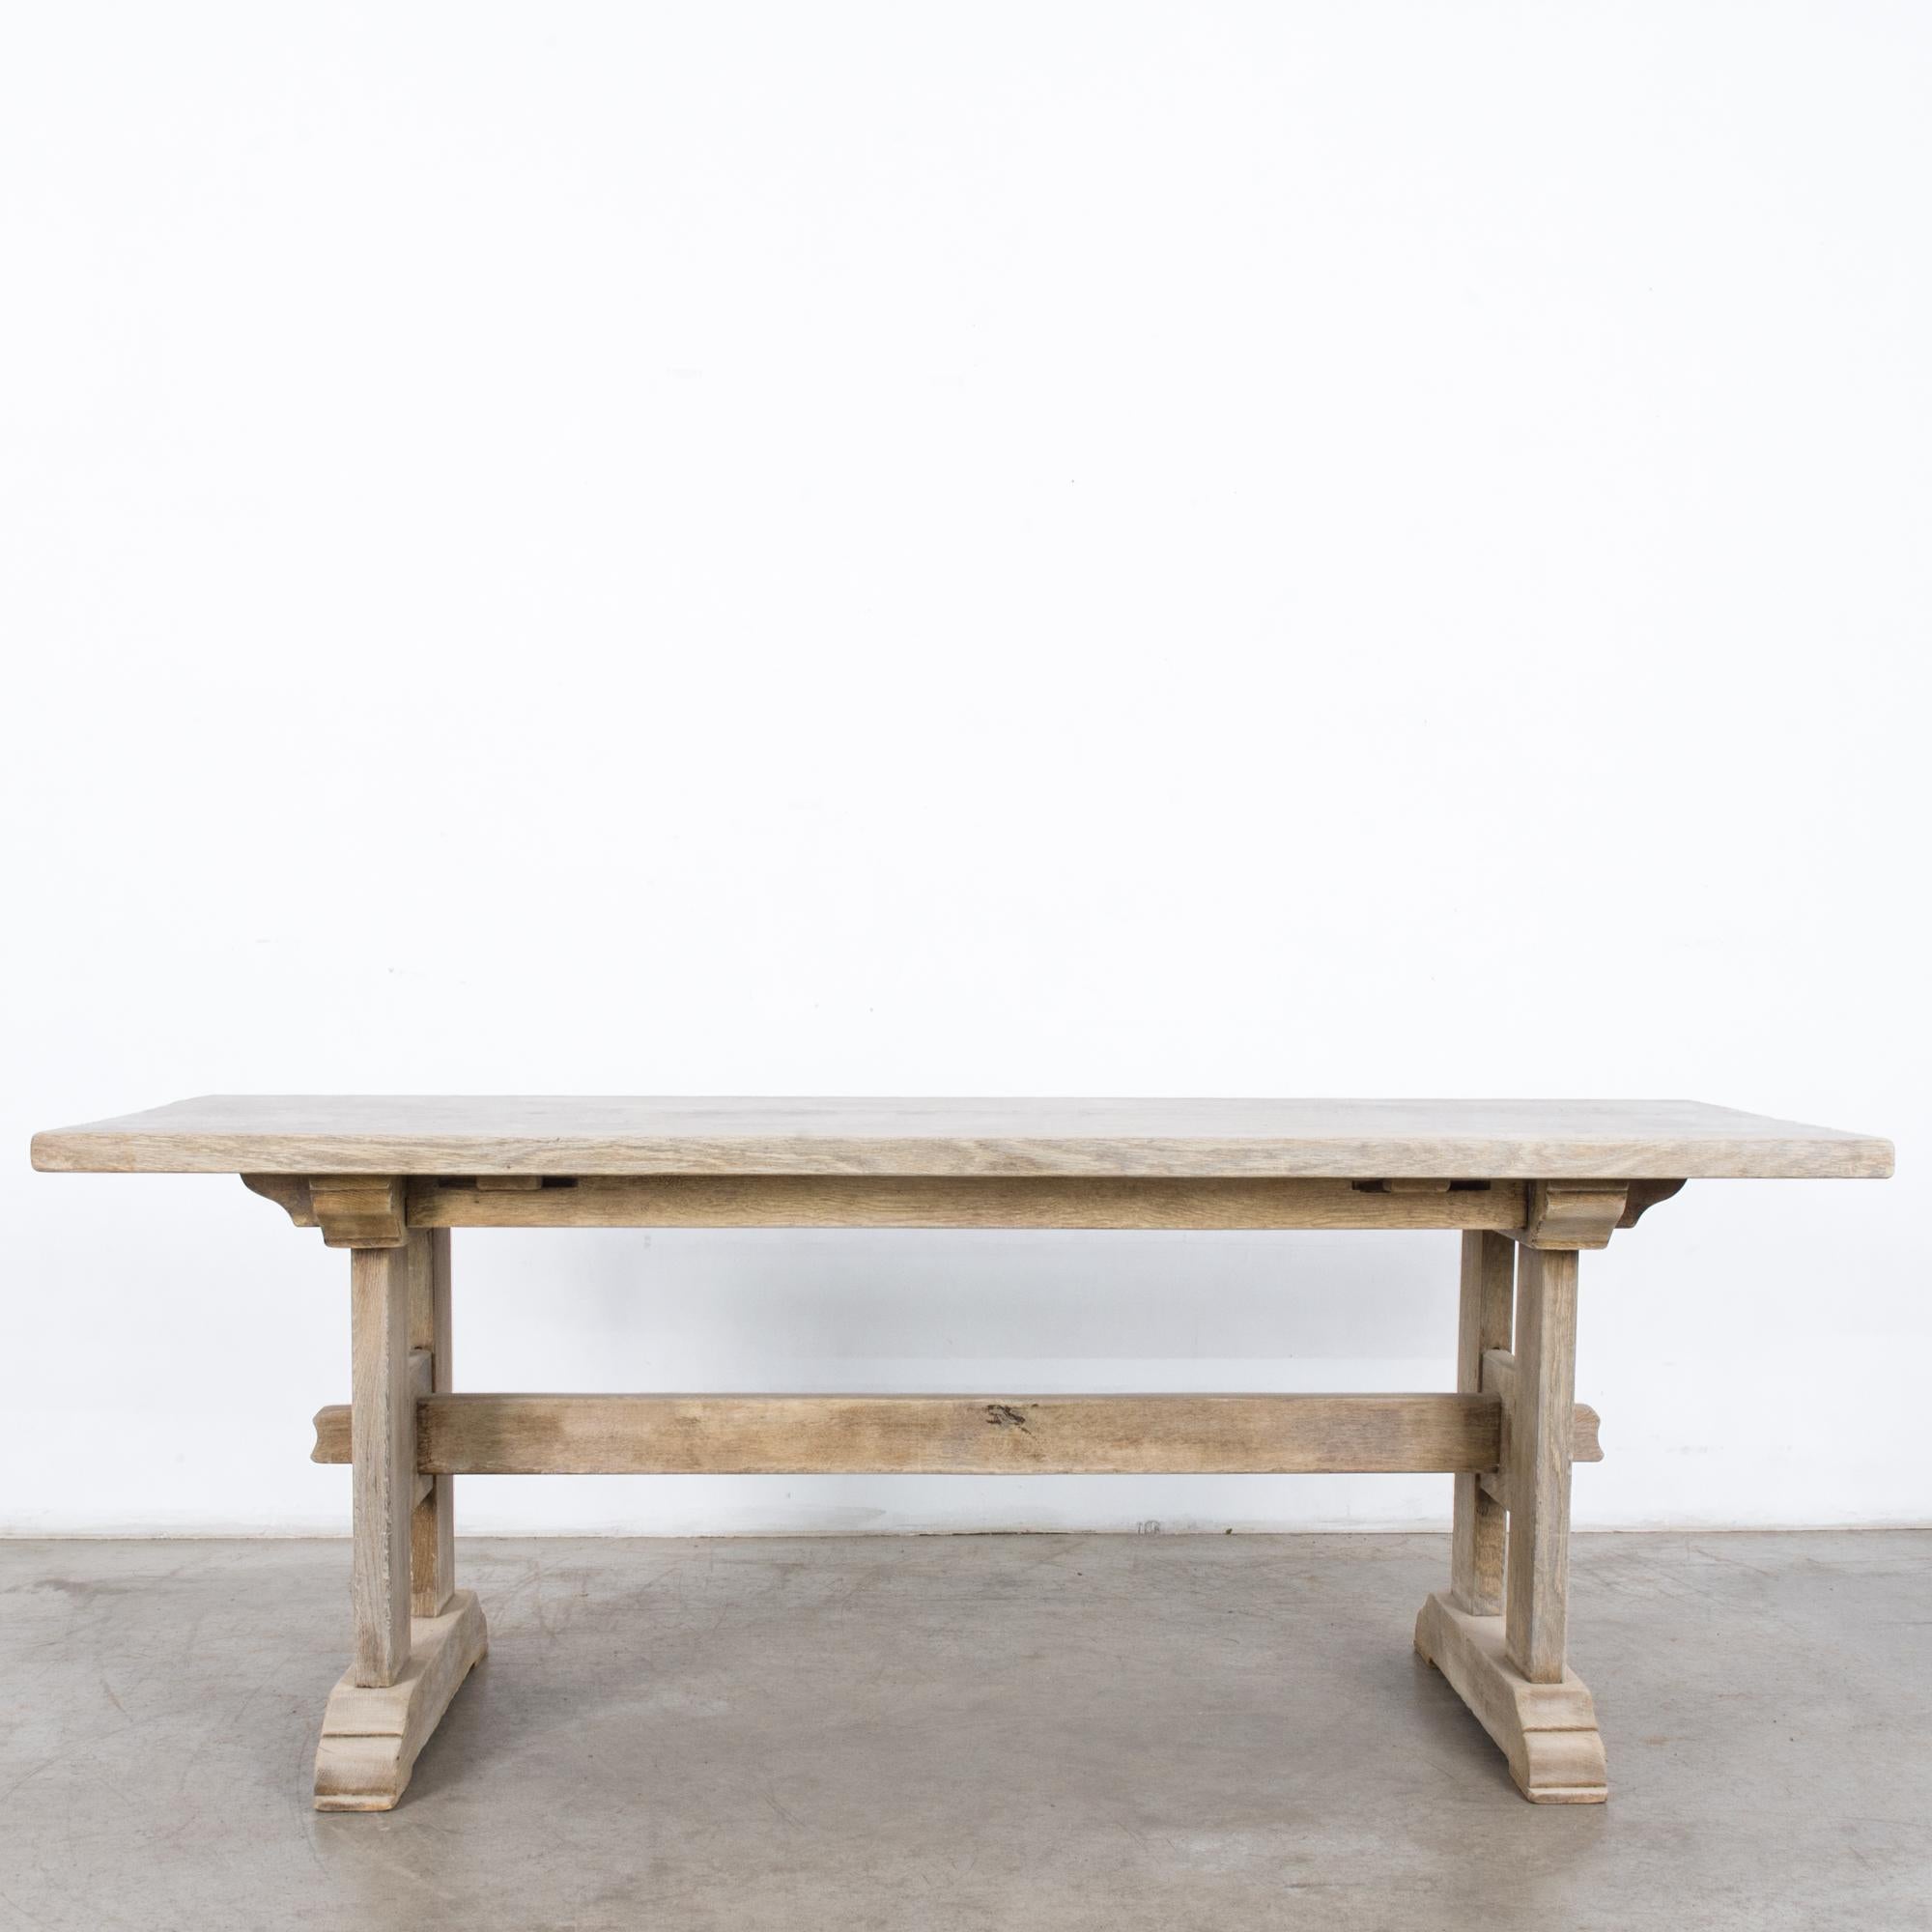 A bleached oak dining table from France, circa 1960. A sturdy tabletop sits atop trestle legs. An intricate arrangement of pegs and slats provides decorative support. The oak has been restored to a bright bleached finish. An elegant construction